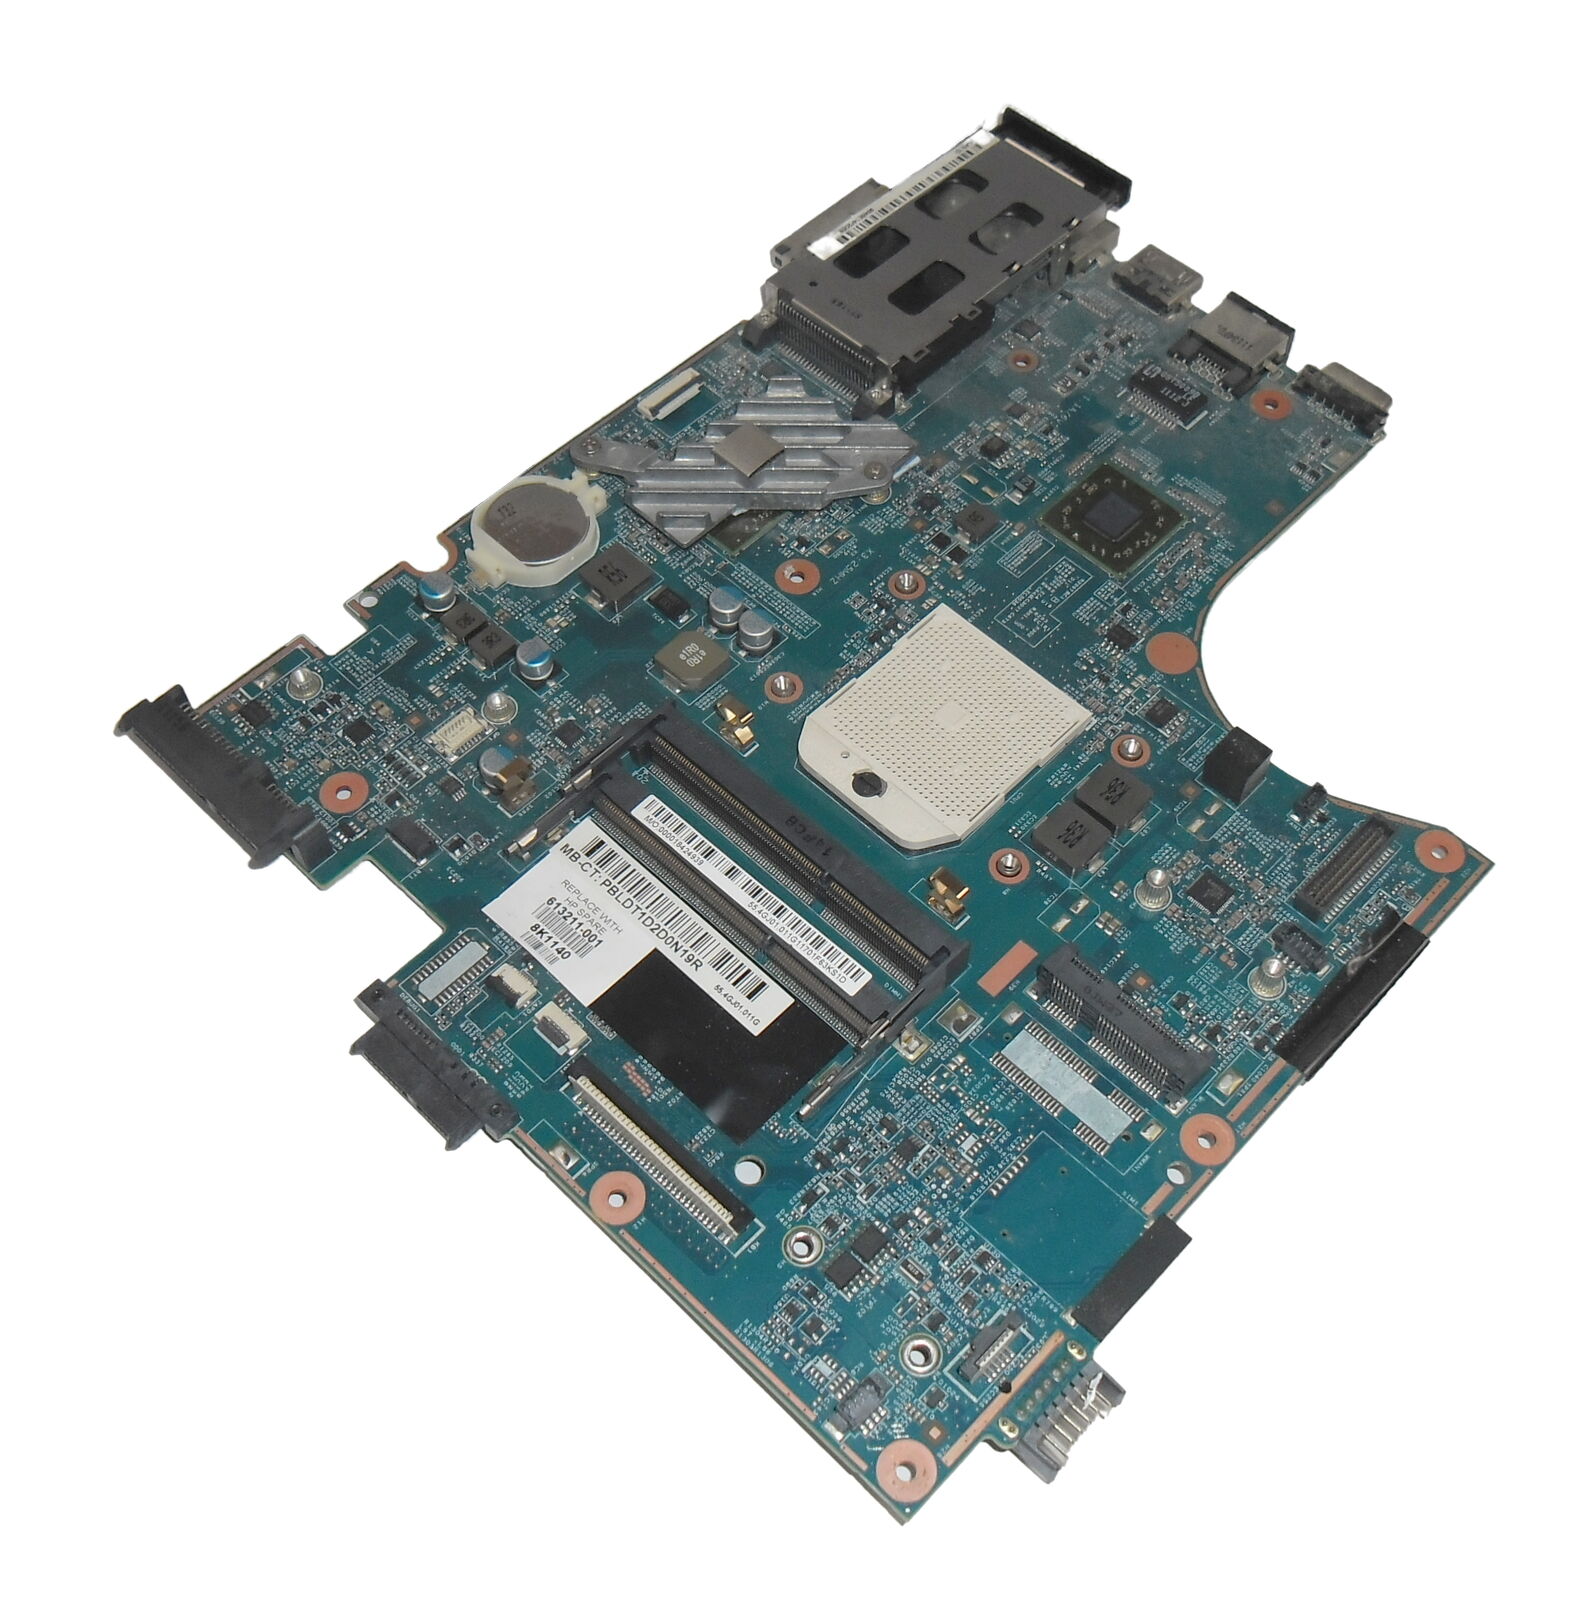 HP ProBook 4525s Laptop Motherboard - 613211-001/616647-001 Brand - HP All items are fully tested and worki - Click Image to Close